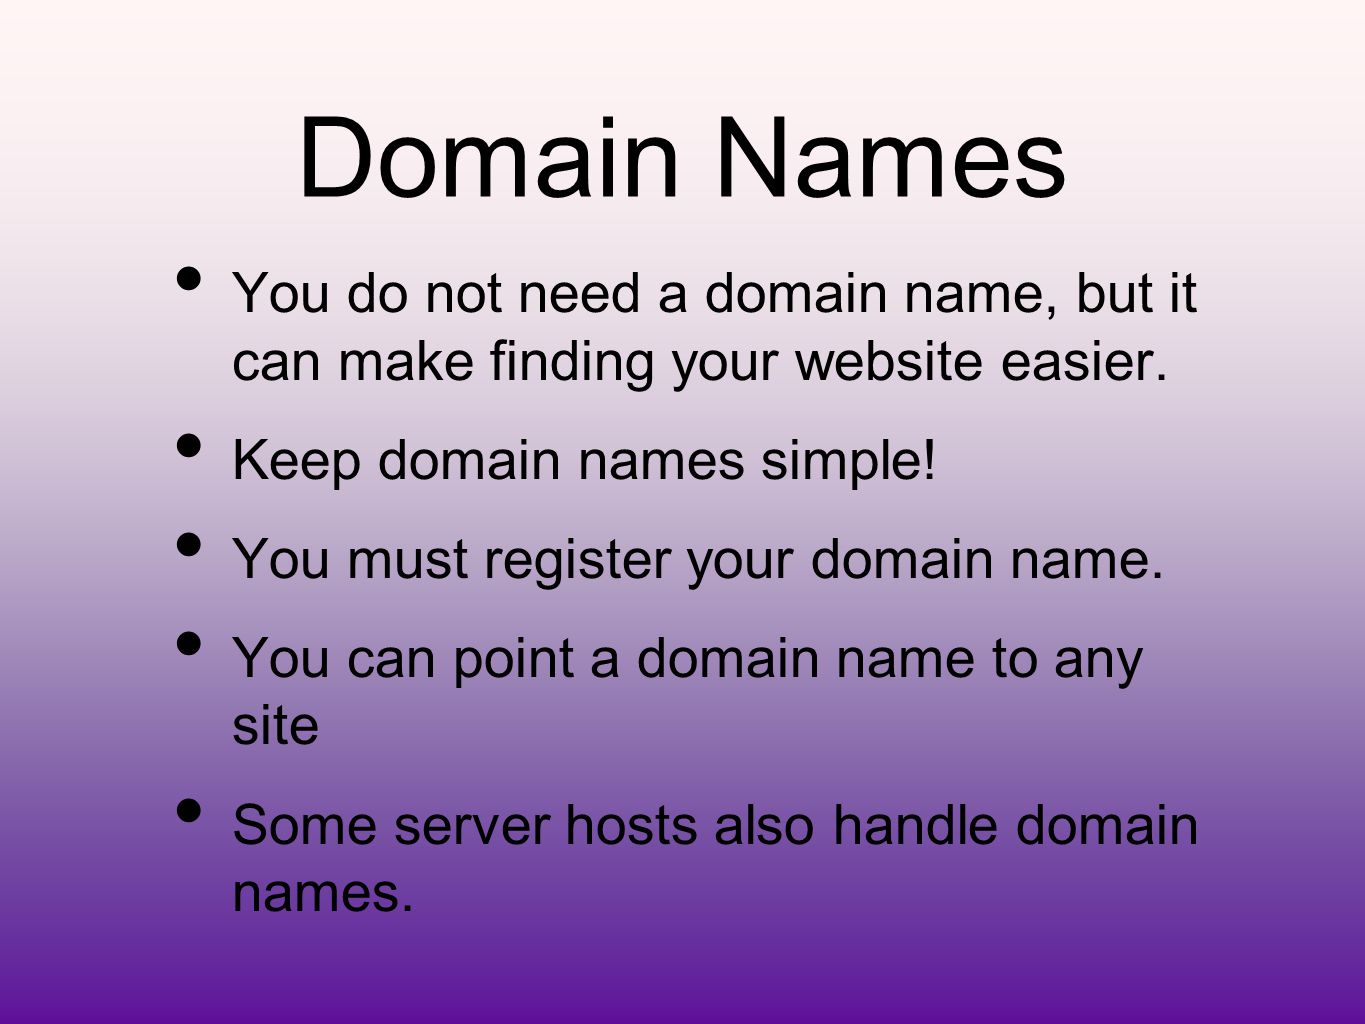 Domain Names You do not need a domain name, but it can make finding your website easier.